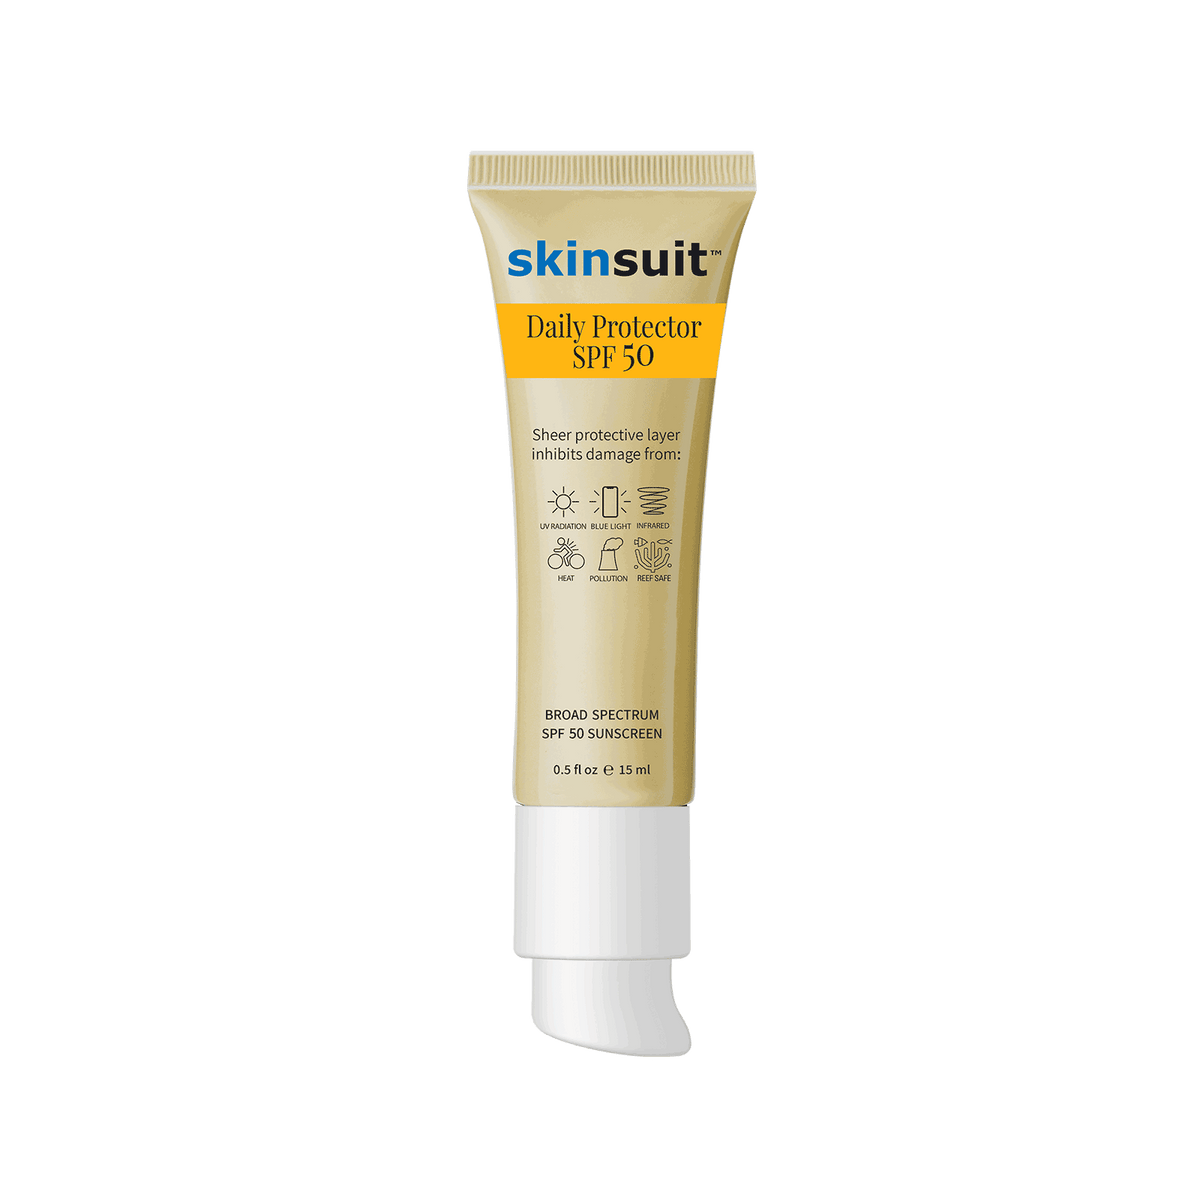 SkinSuit Daily Protector SPF 50 Sunscreen